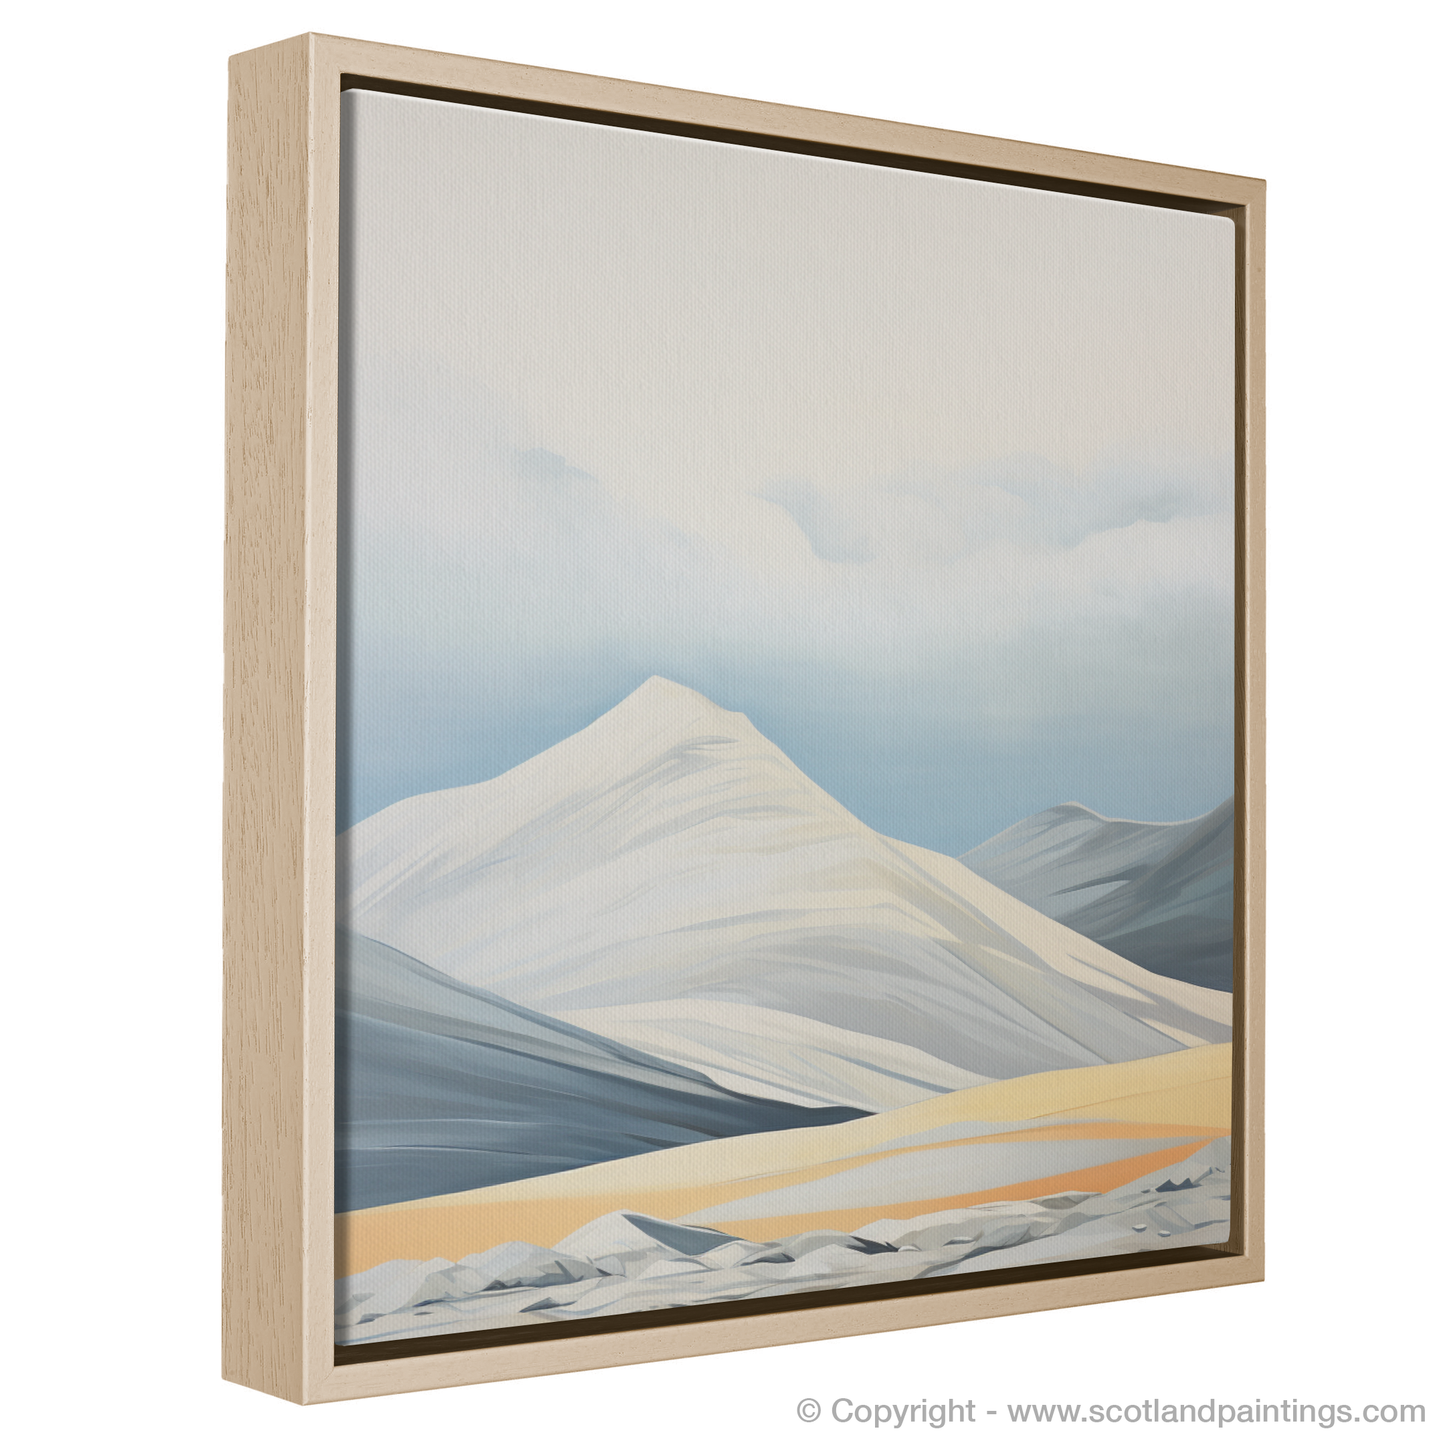 Painting and Art Print of Ben Lawers entitled "Majestic Ben Lawers: An Abstract Homage".